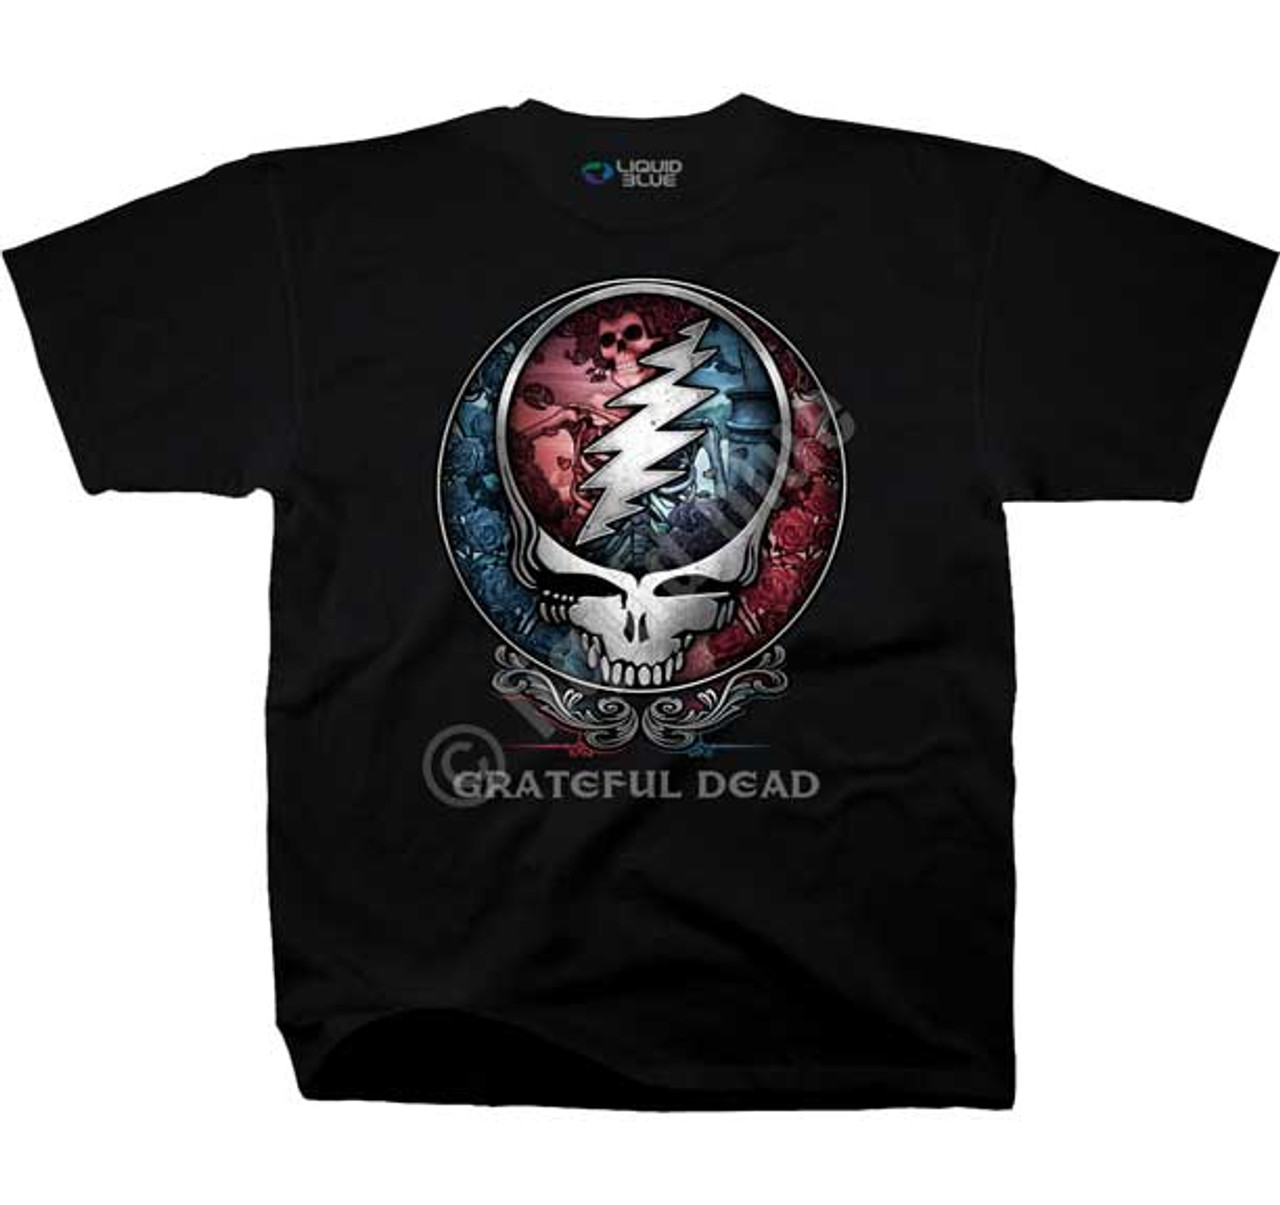 New Embroidery Grateful Dead Steal Your Face Logo Pin Collection